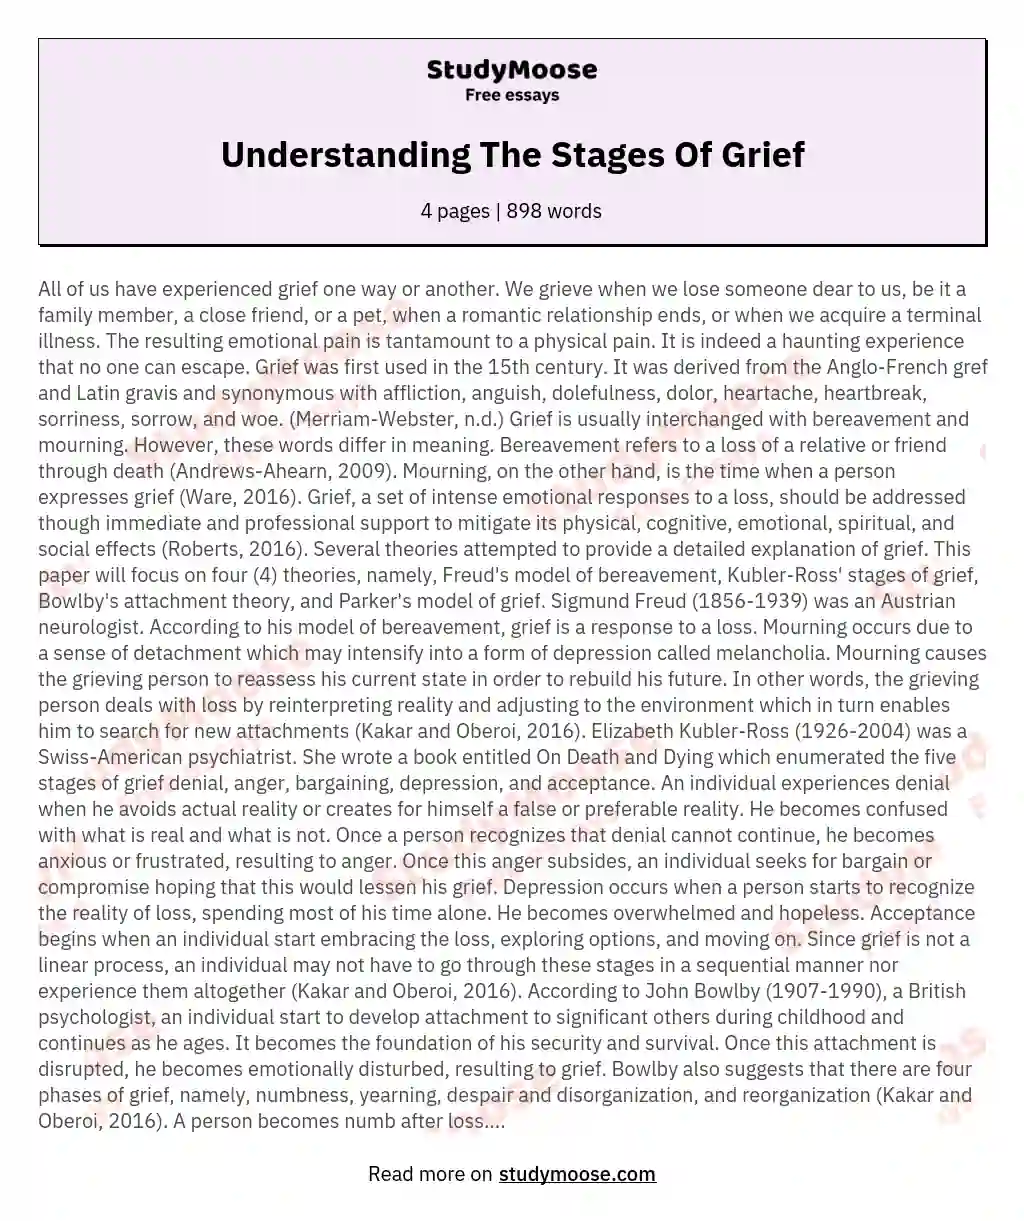 Understanding The Stages Of Grief essay